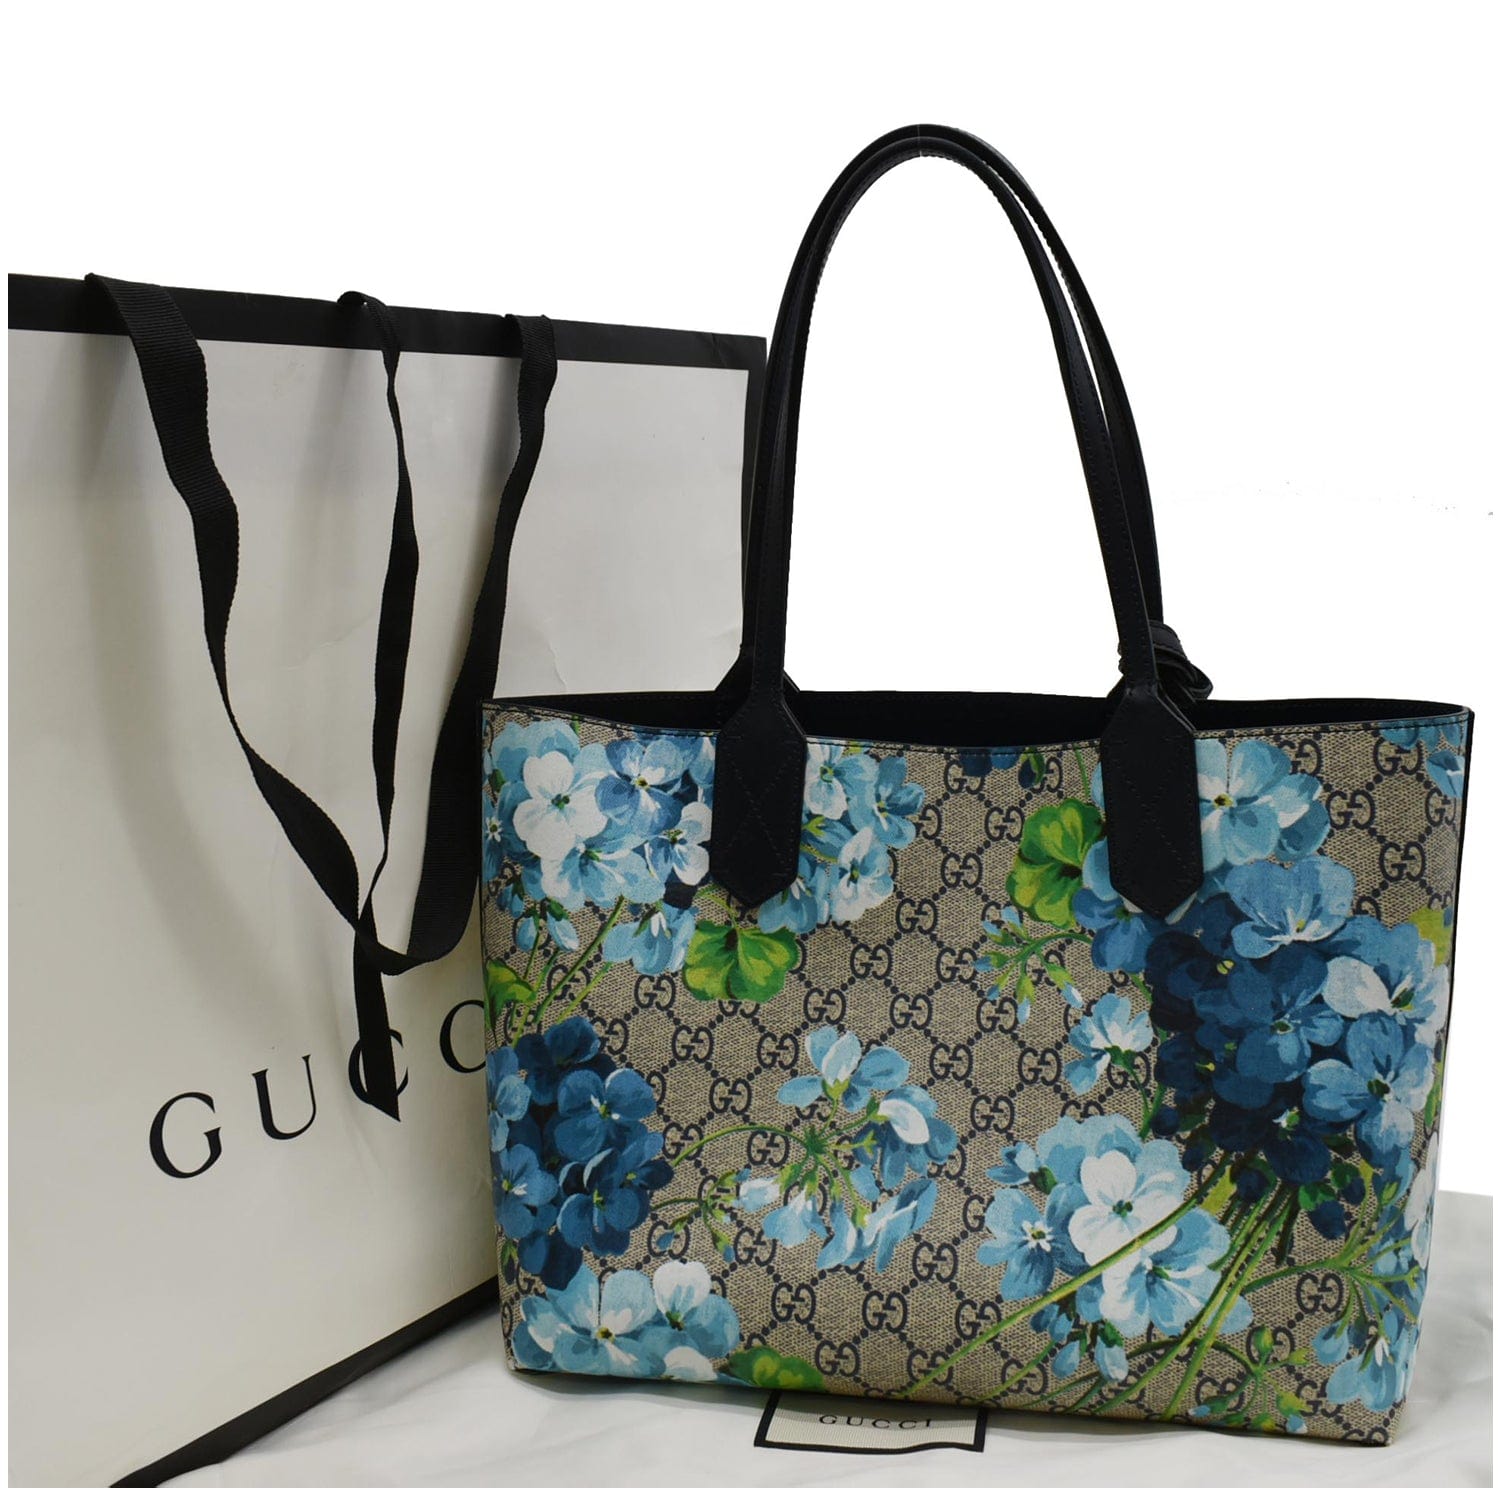 Gucci GG Tote Bag!! This is one of my favorites.. starting at $385